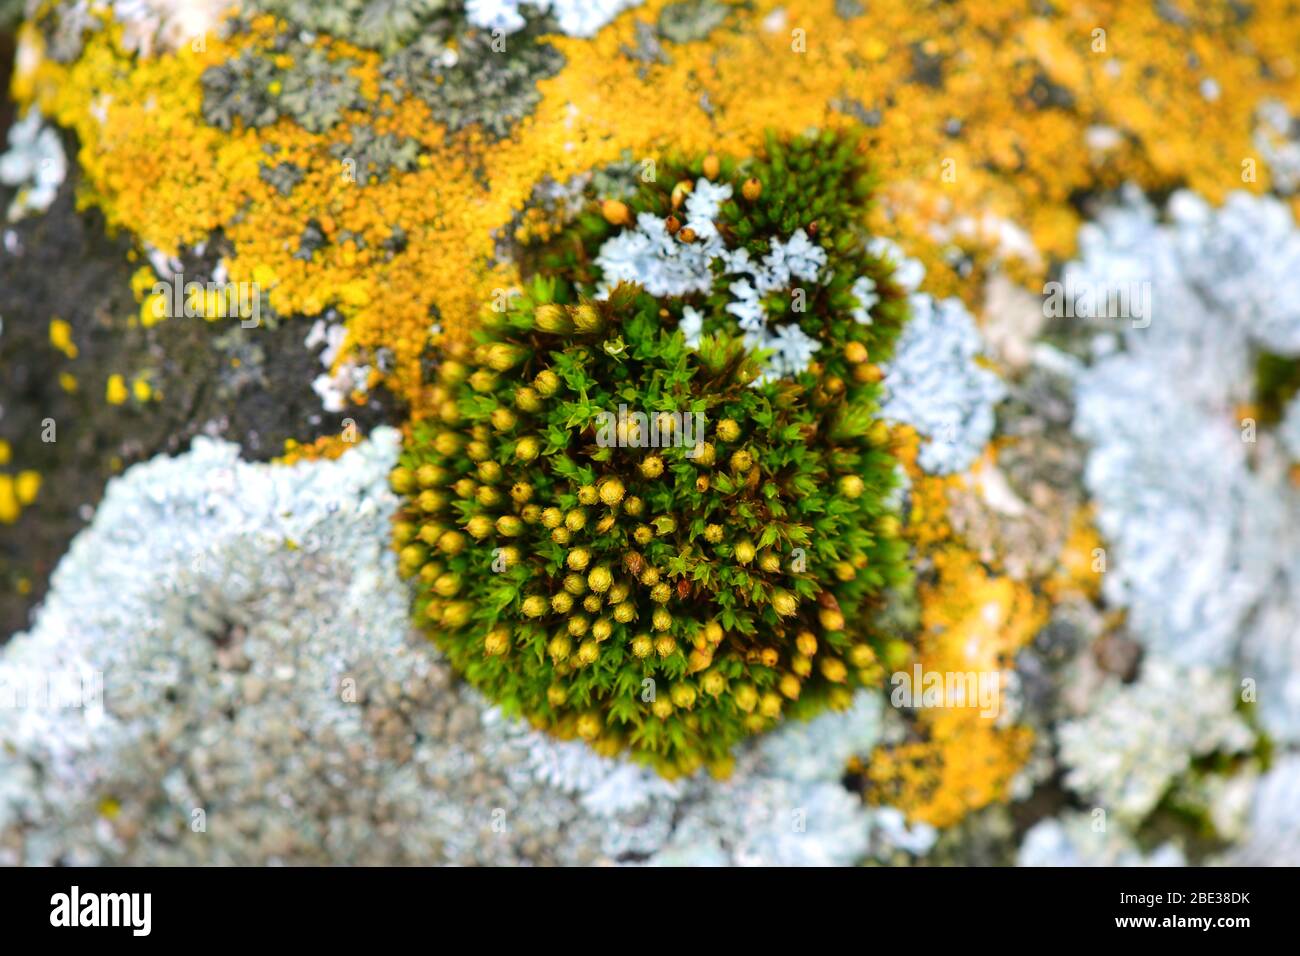 Tortula muralis, Polytrichum and Caloplaca thallincola mosses on the rock. Stock Photo